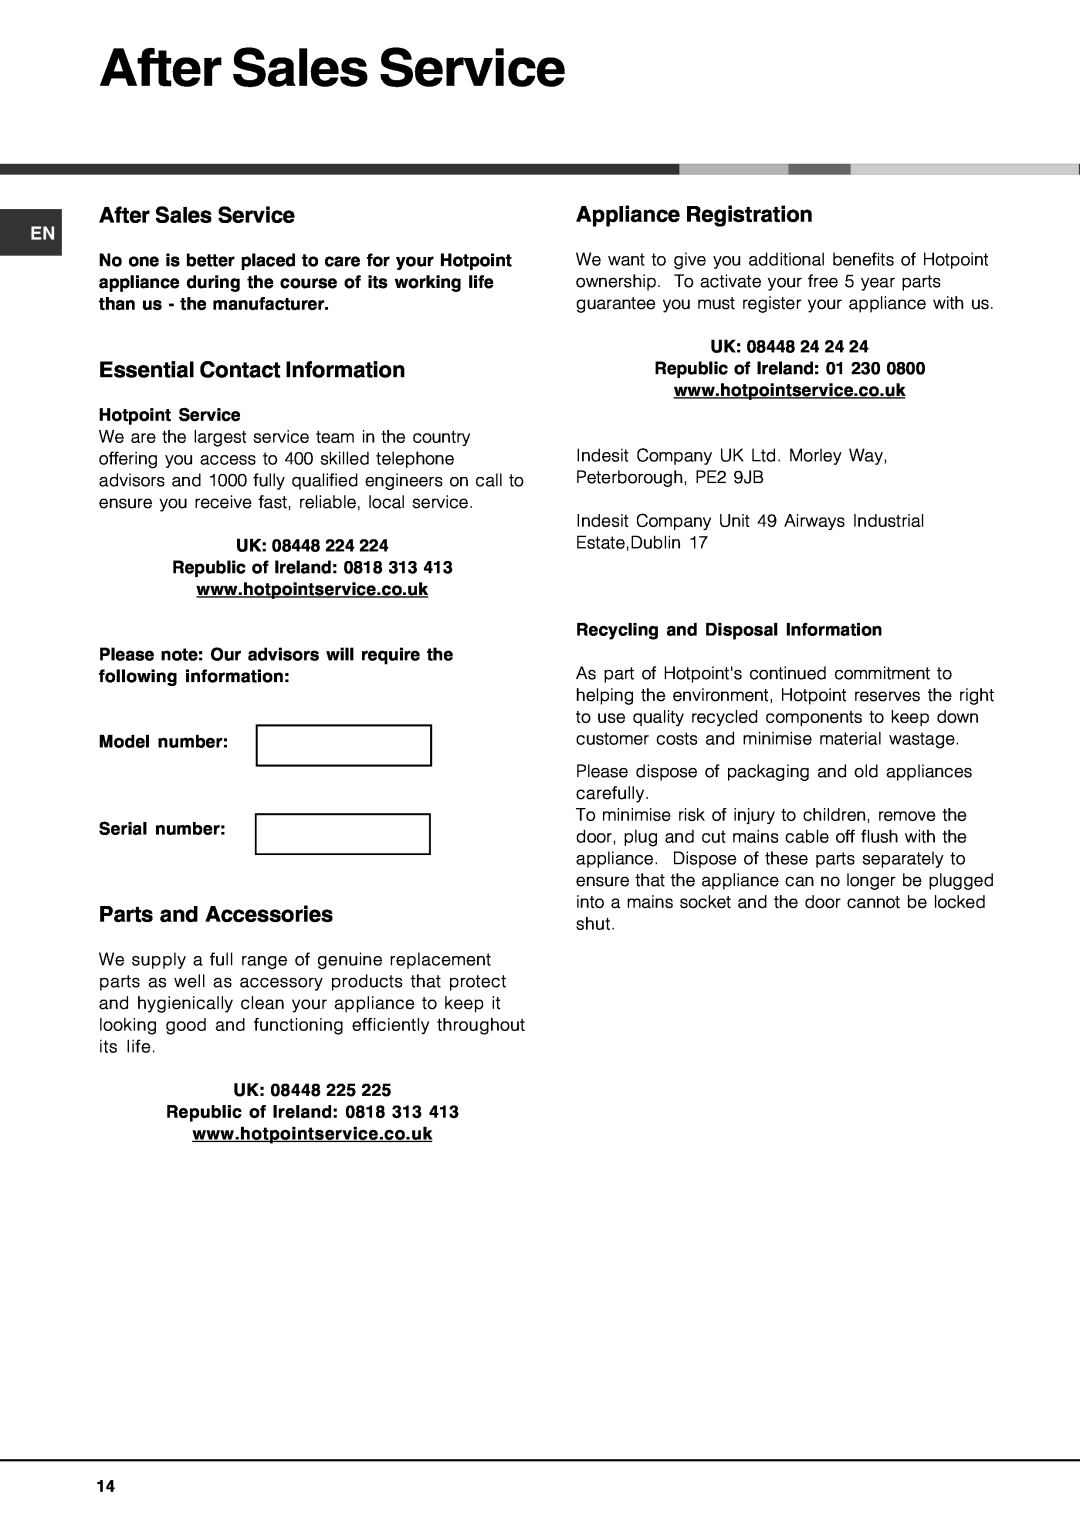 Hotpoint FDM550PR manual After Sales Service, Essential Contact Information, Parts and Accessories, Appliance Registration 